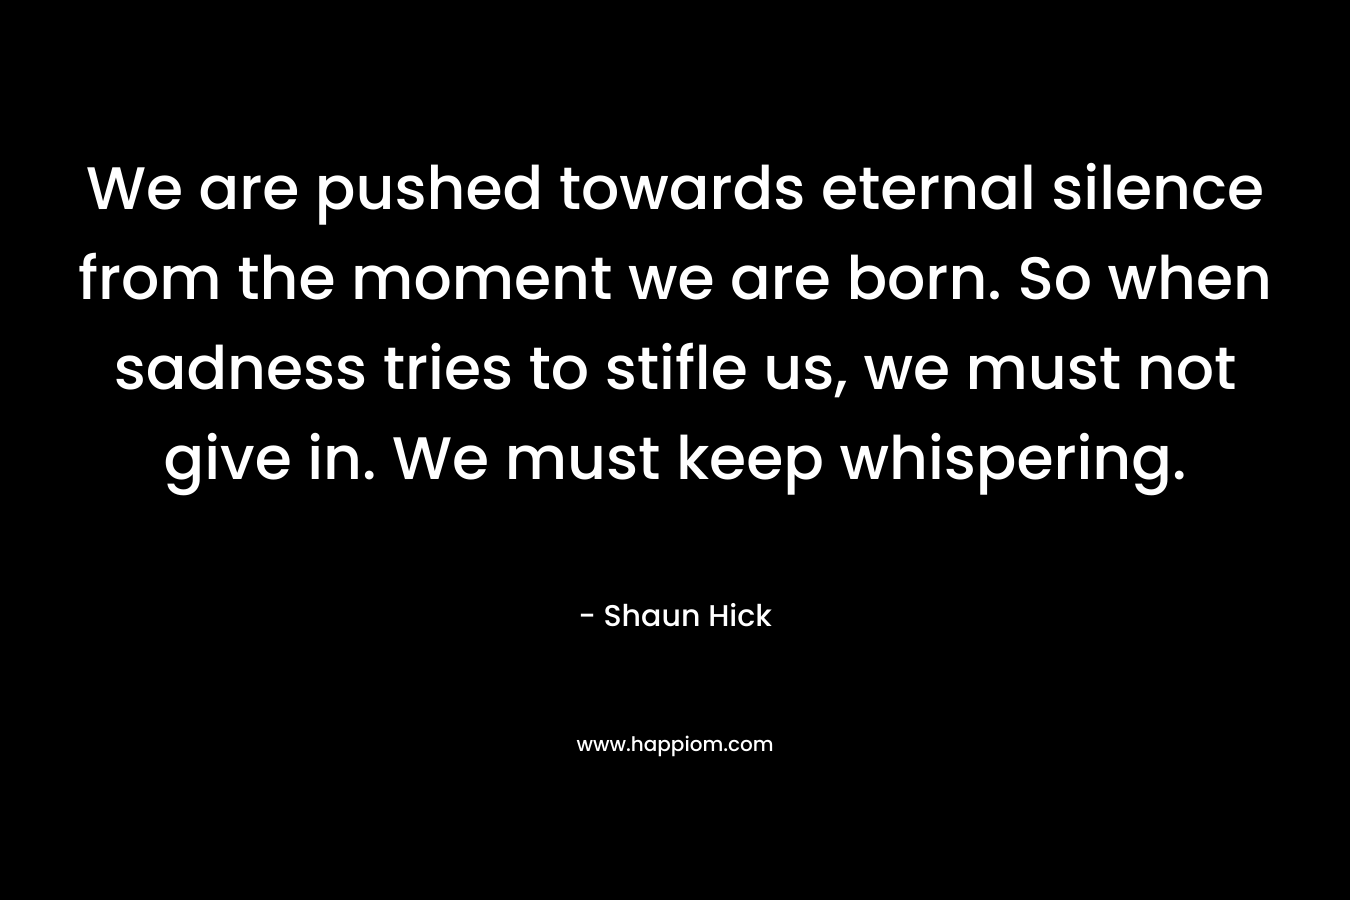 We are pushed towards eternal silence from the moment we are born. So when sadness tries to stifle us, we must not give in. We must keep whispering. – Shaun Hick